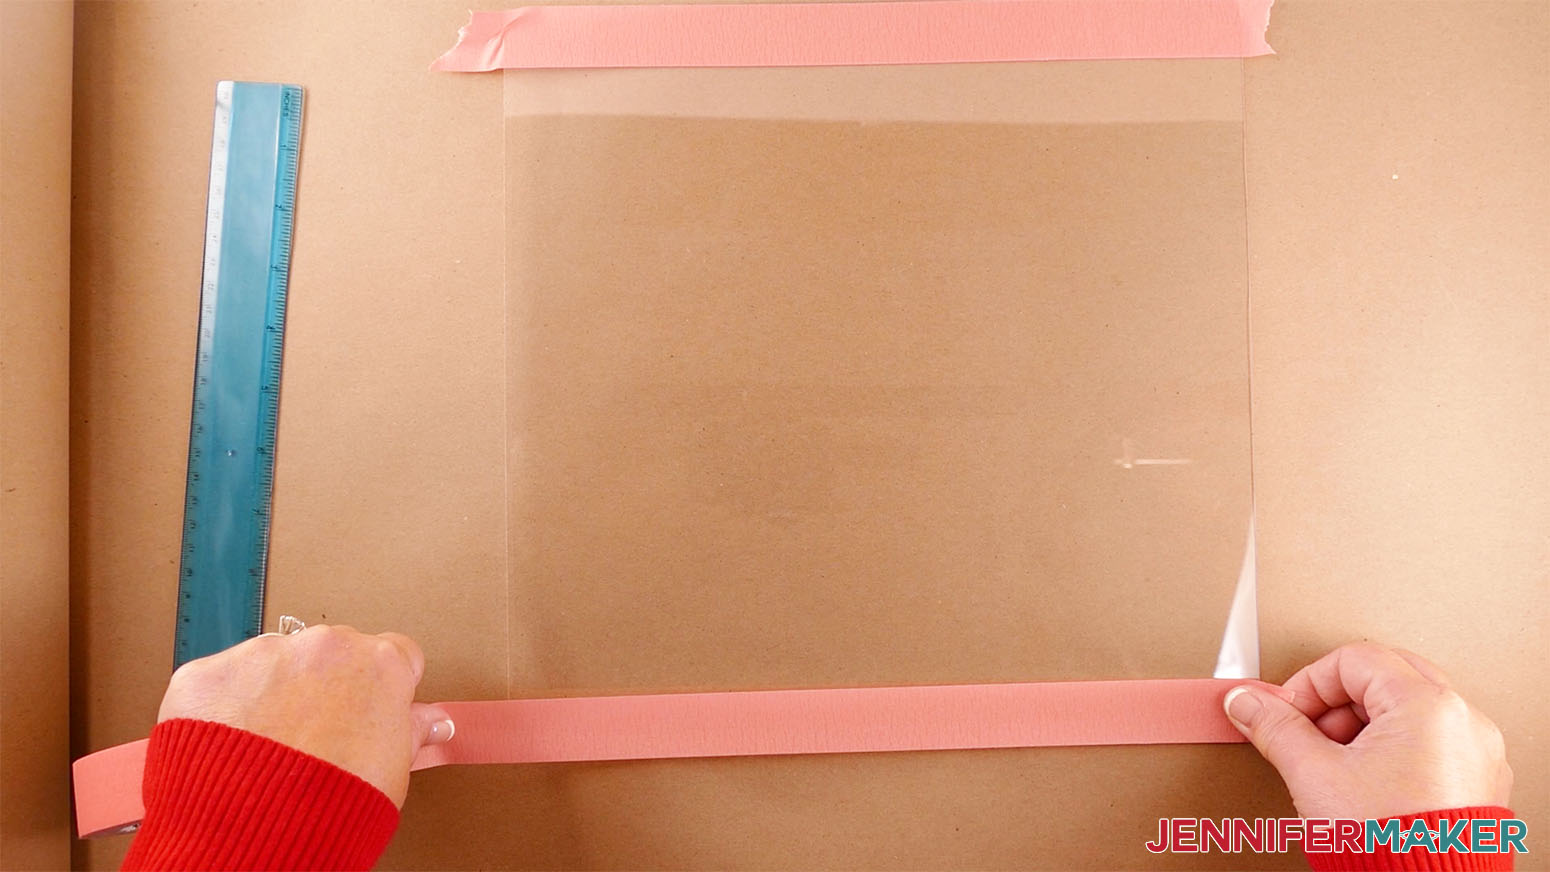 Image showing to lay down painters tape on the outside edges of the plexiglass to create guidelines.